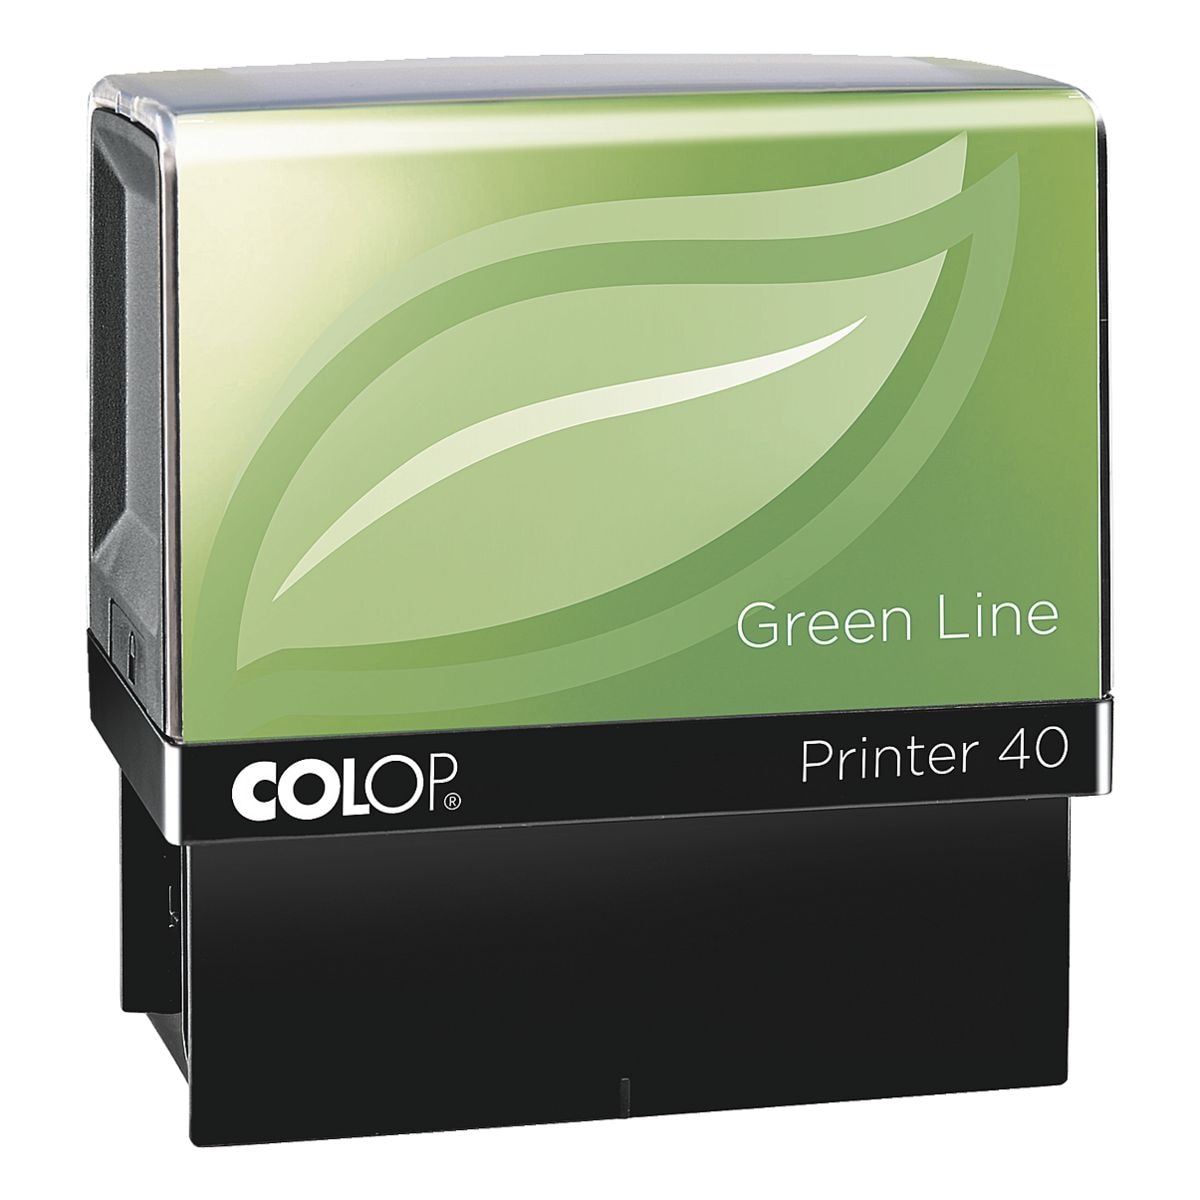 Colop Selbstfrbender Textstempel Printer 40 Green Line